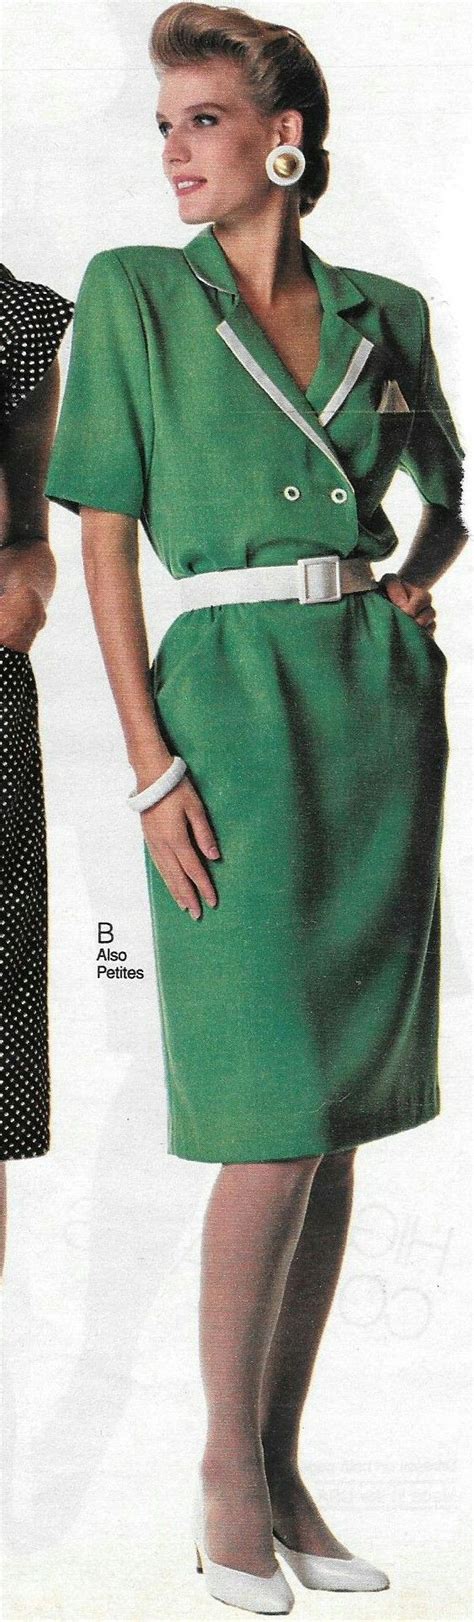 Pin By Mark On My Lovely Jcpenney Models Fashion 80s Fashion